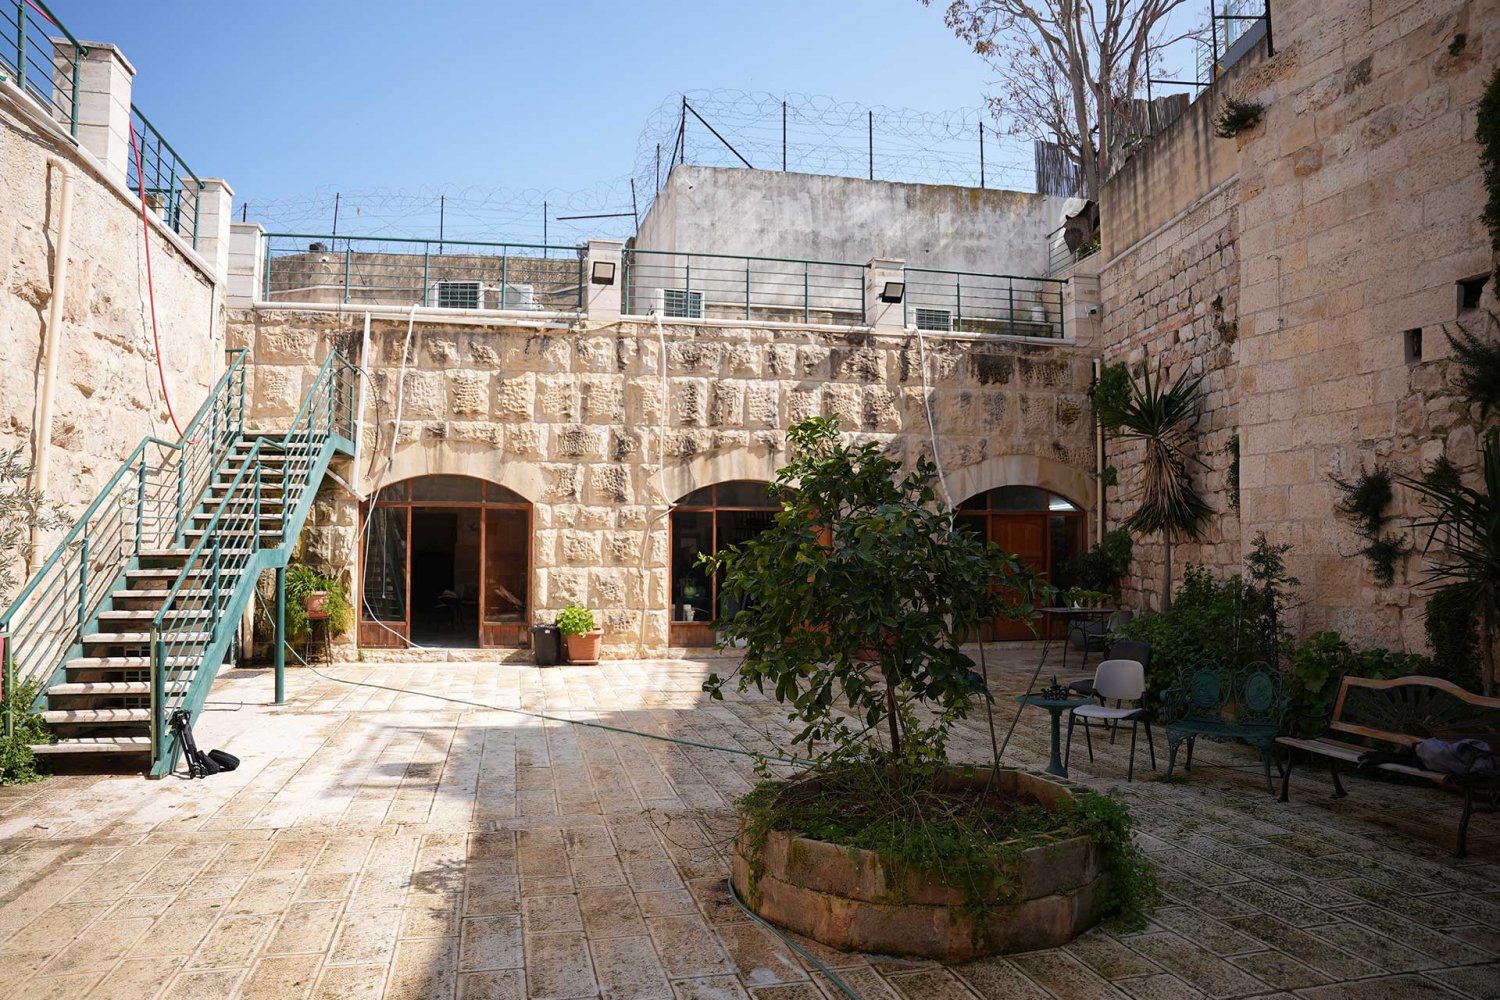 The outdoor courtyard of the Center for Jerusalem Studies at the Al-Quds University campus in Jerusalem’s Old City.